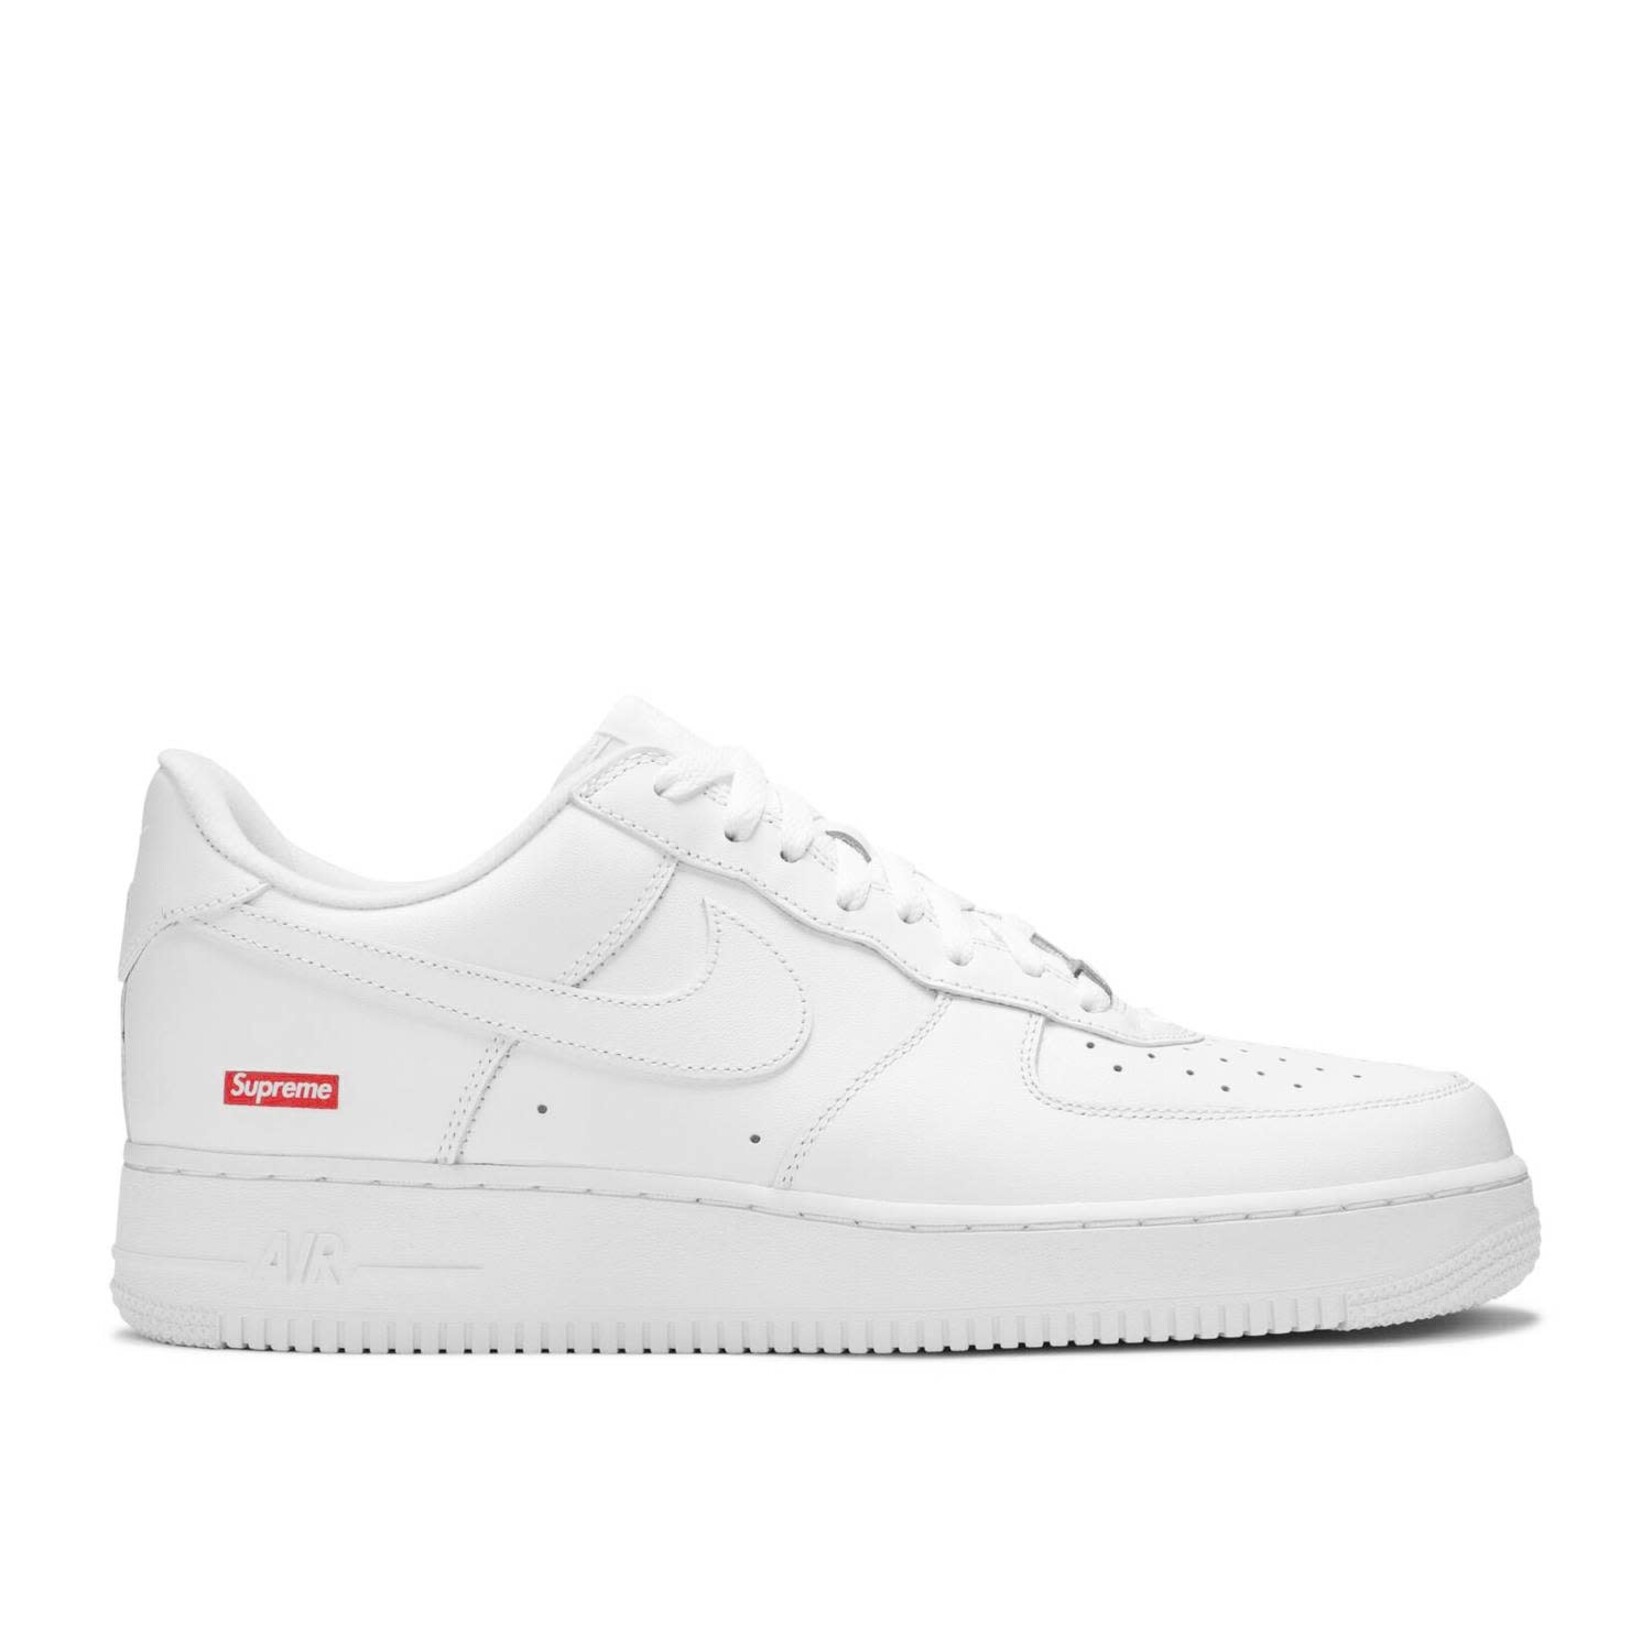 Nike Nike Air Force 1 Low Supreme White Size 12, DS BRAND NEW